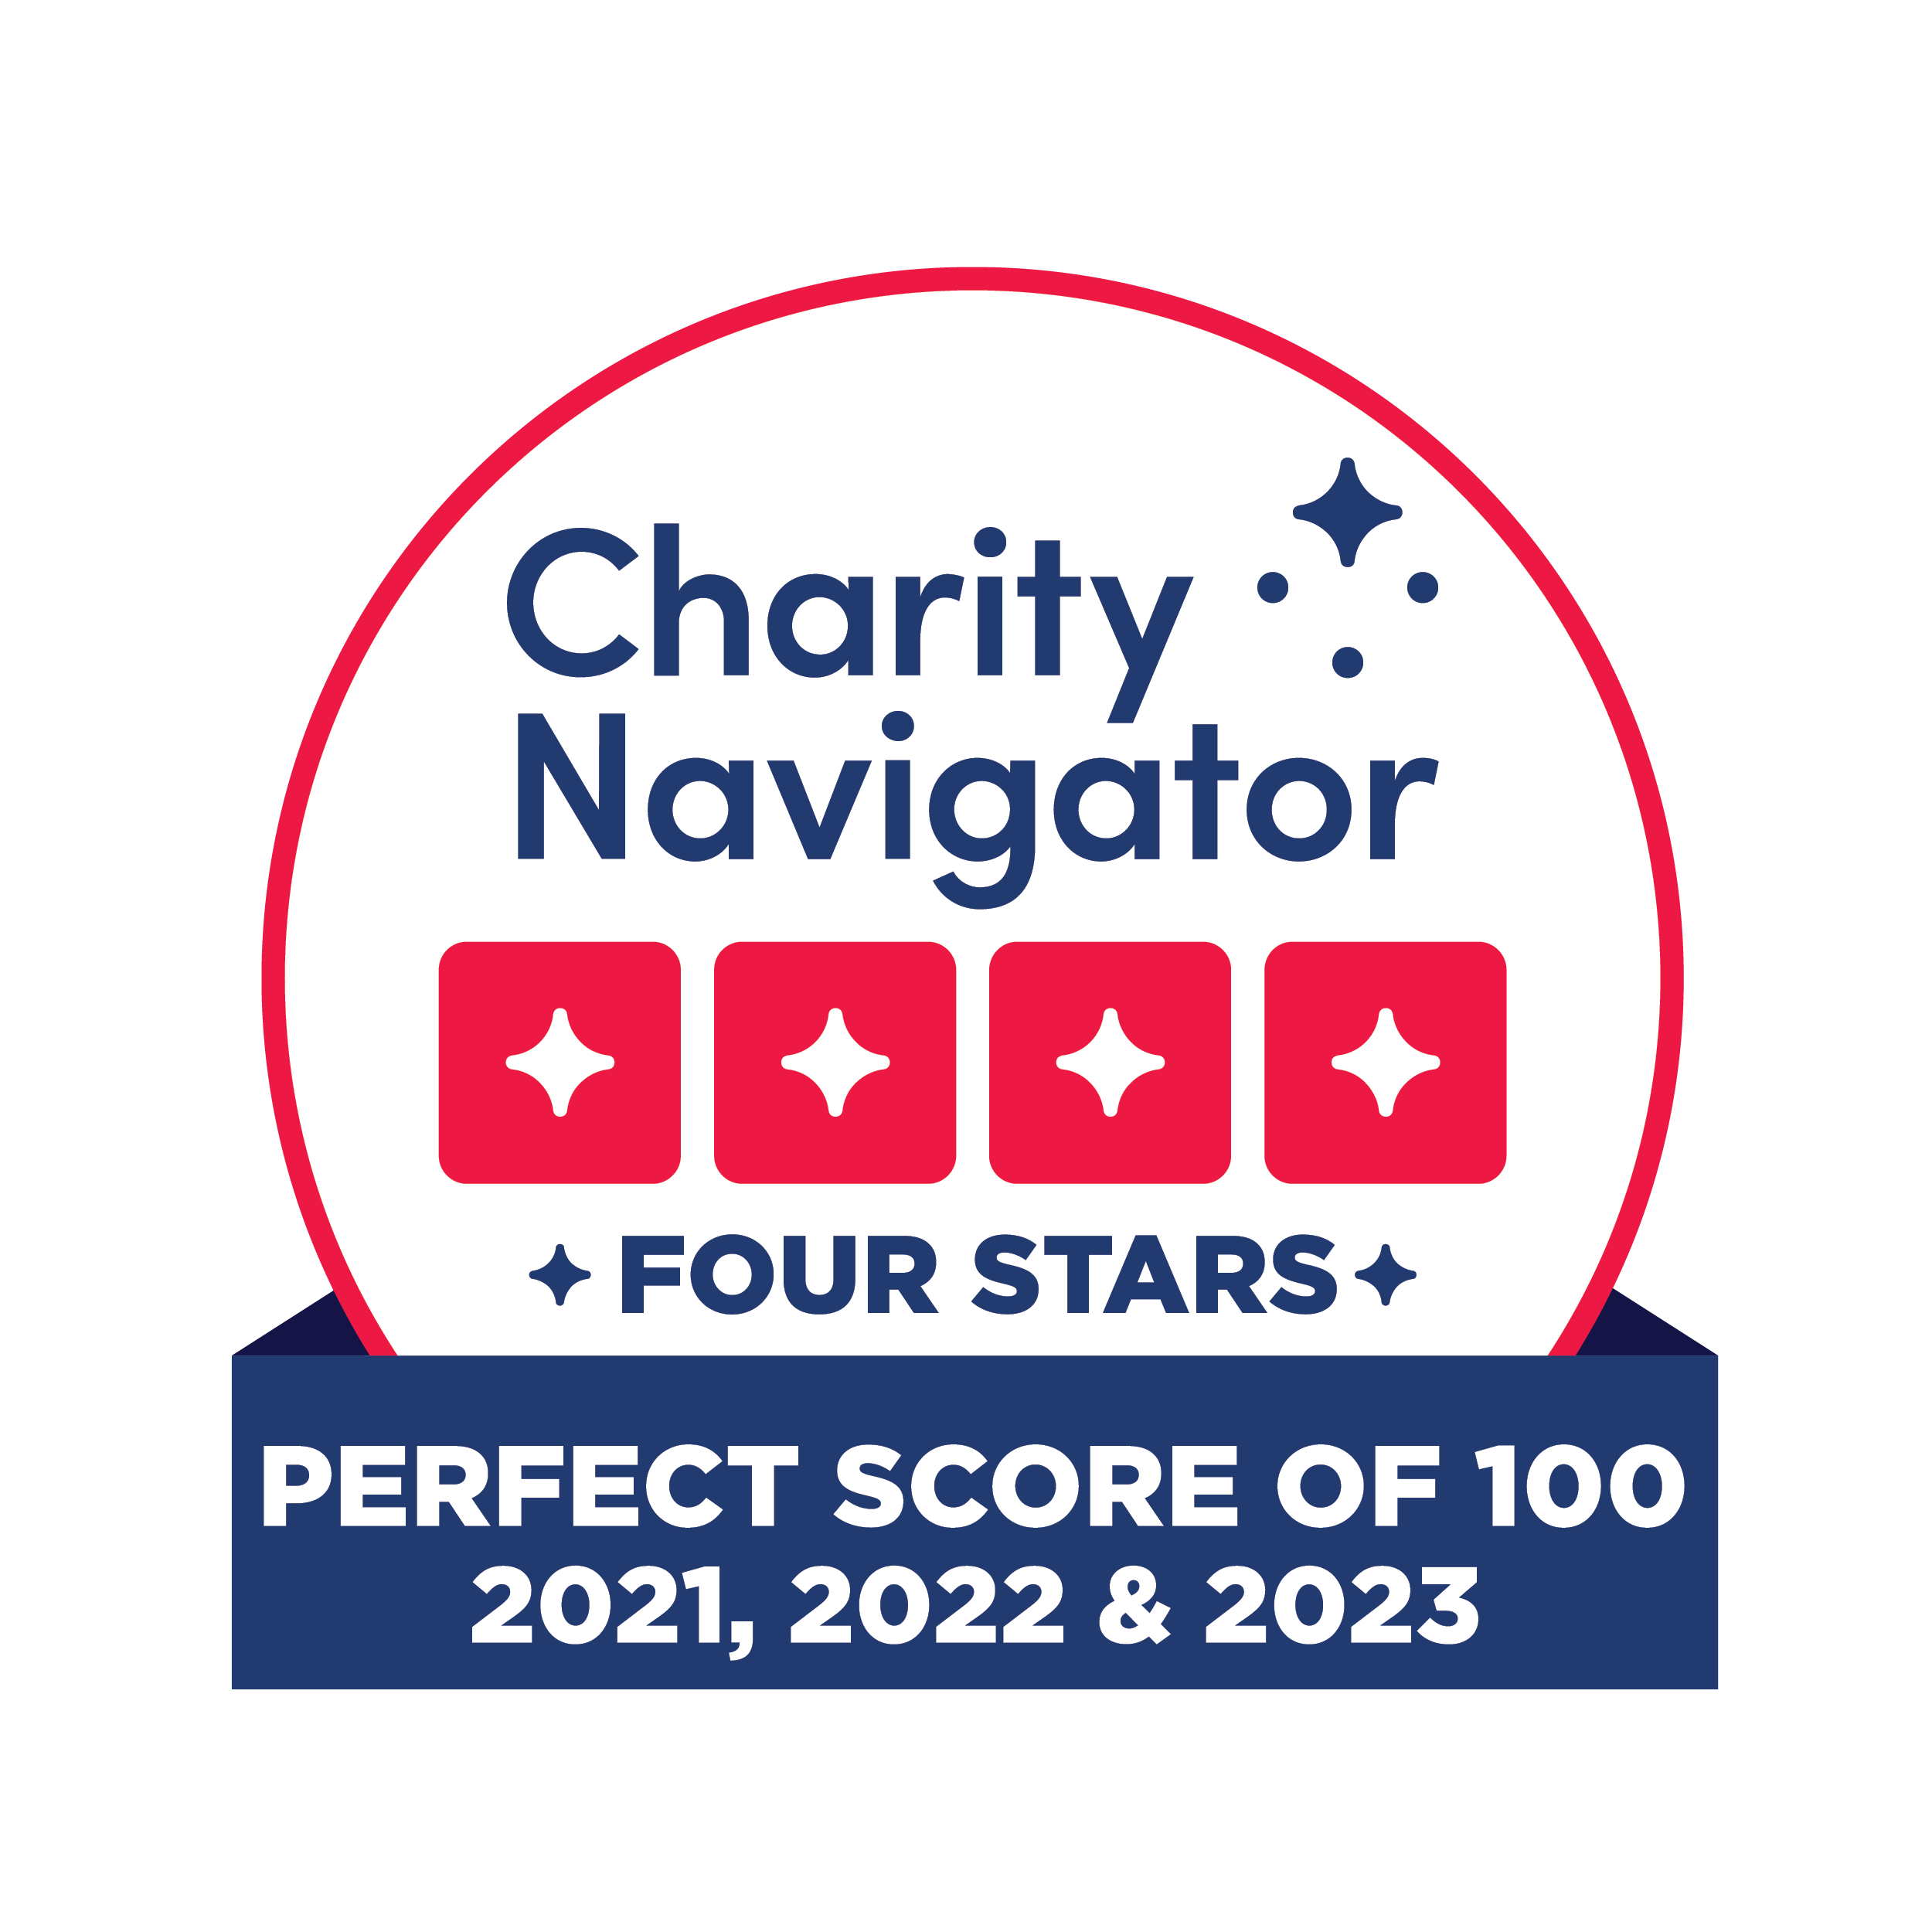 Charity Navigator perfect score of 100 in 2021-2022